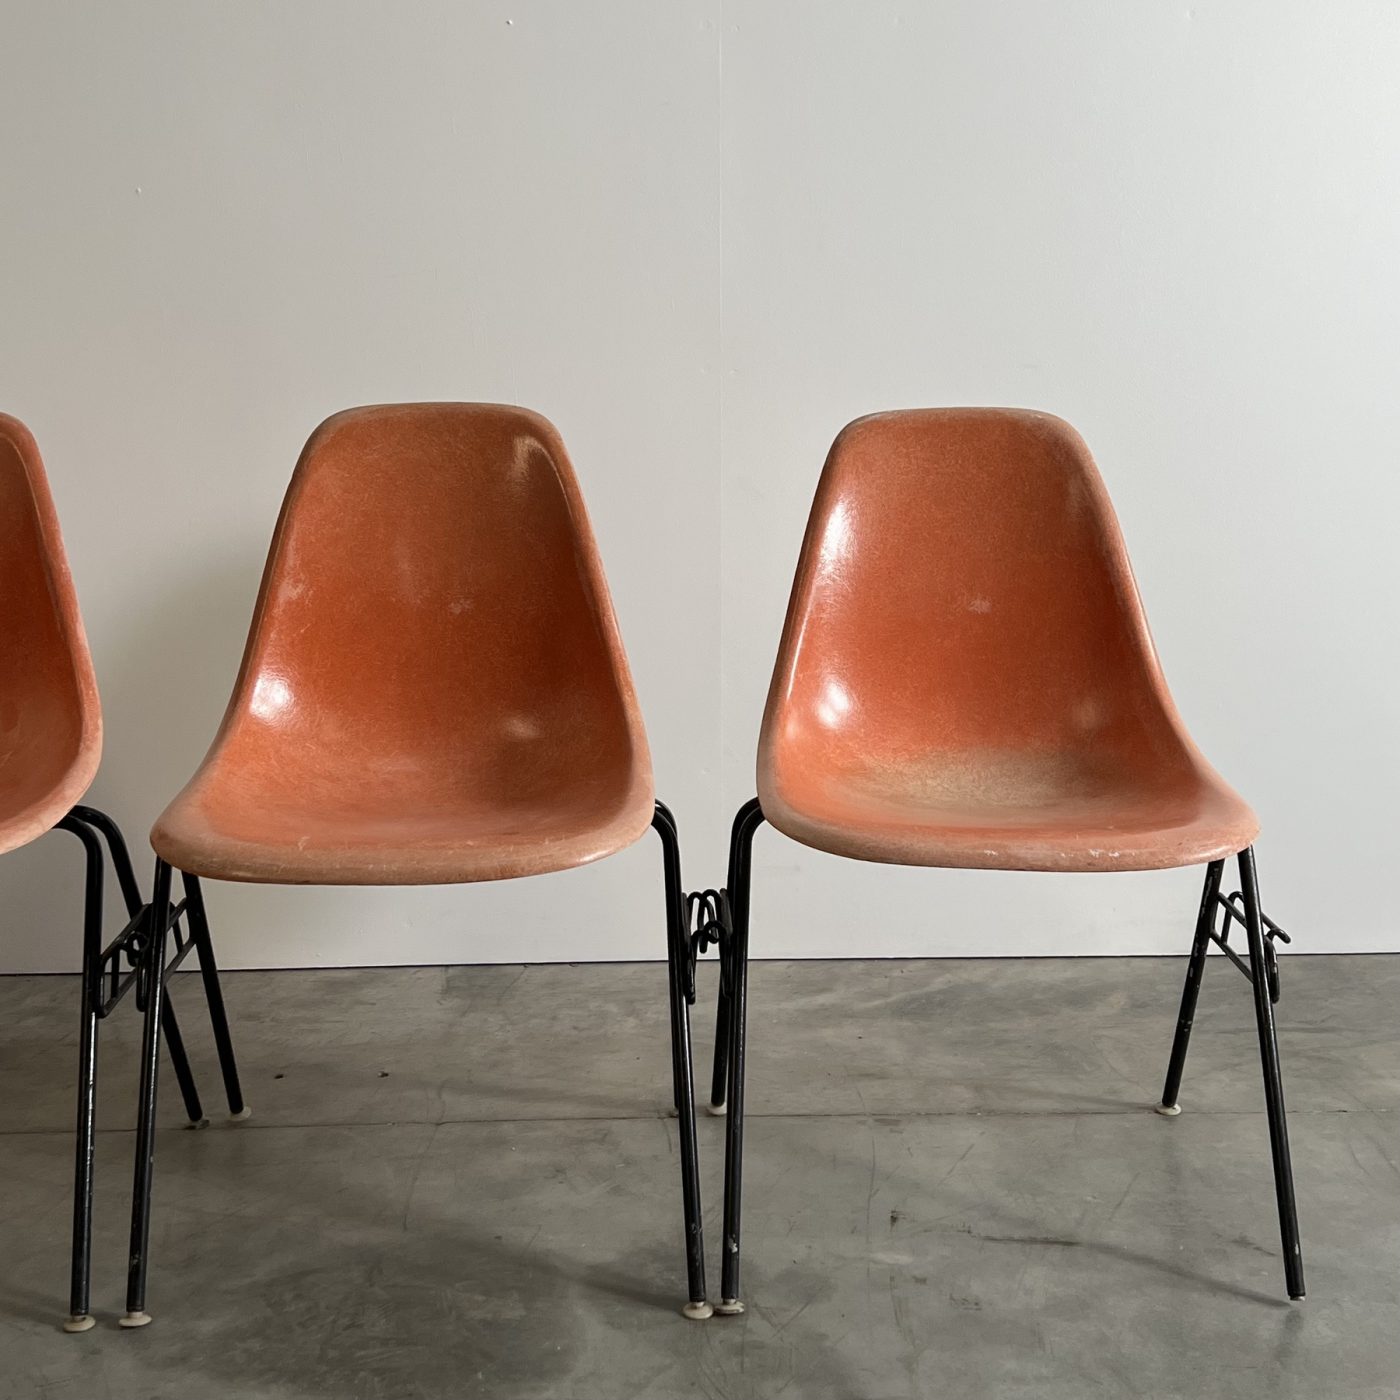 objet-eames-chairs0003